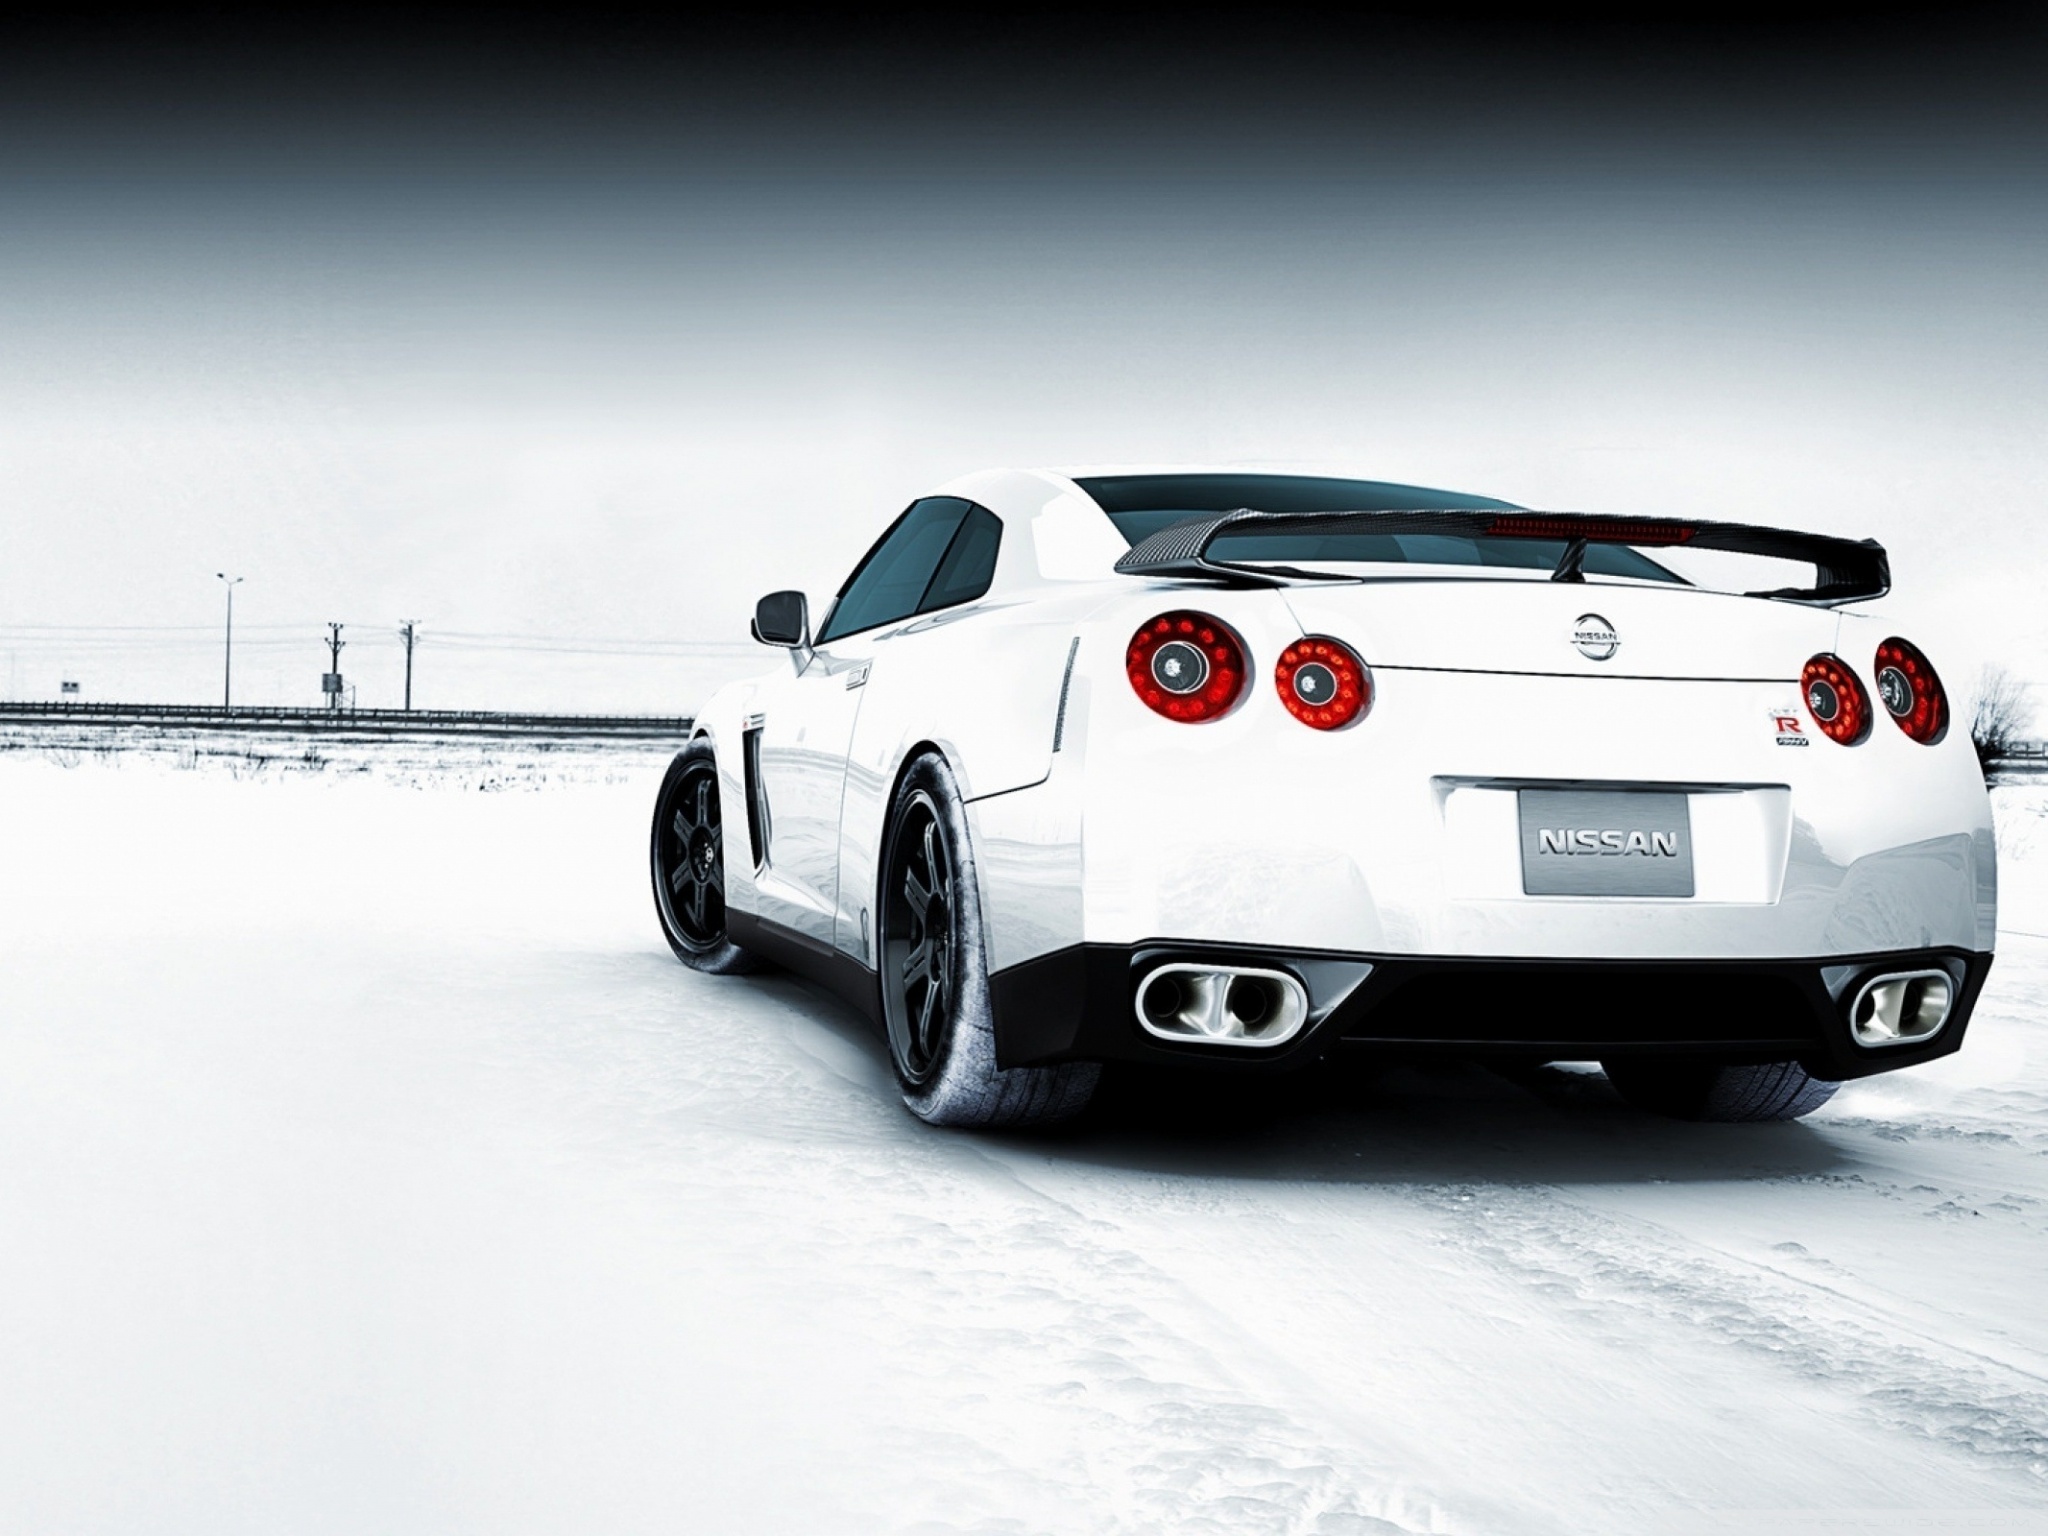 Nissan Gtr Wallpapers For Mobile Devices Background, Gtr Picture Background  Image And Wallpaper for Free Download